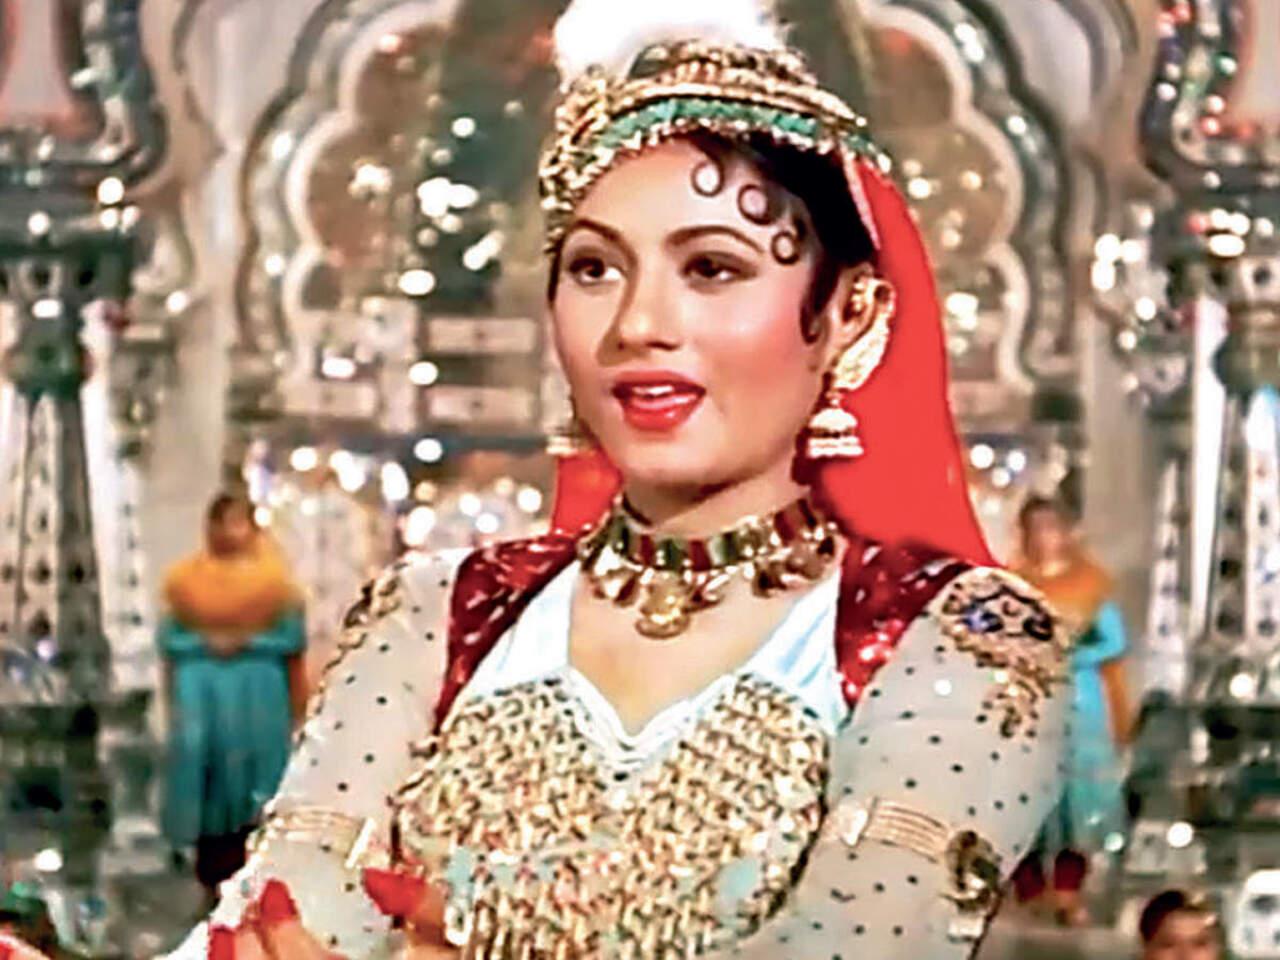 1960s Bollywood fashion - Madhubala in 'Mughal-e-Azam'
The sixties marked a flamboyant era for Bollywood. Actresses embraced a more fashionable and sophisticated look. There was a notable evolution in hairstyles, with many becoming timeless trends still prevalent today. Iconic films from this period not only shaped the cinematic landscape but also showcased leading Bollywood ladies setting style benchmarks for a nation transitioning from its colonial past.